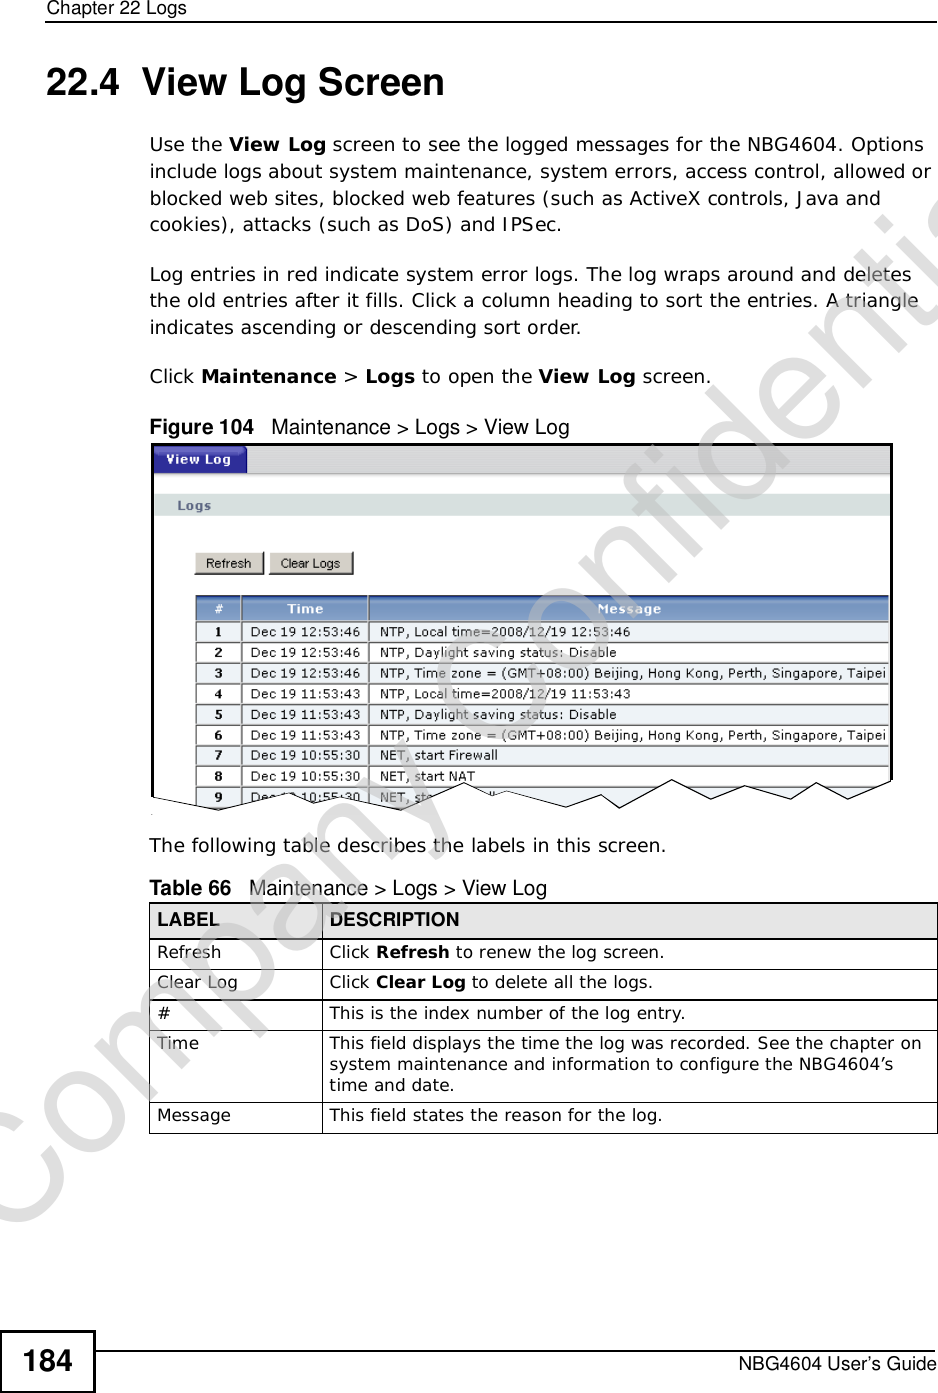 Chapter 22LogsNBG4604 User’s Guide18422.4  View Log ScreenUse the View Log screen to see the logged messages for the NBG4604. Options include logs about system maintenance, system errors, access control, allowed or blocked web sites, blocked web features (such as ActiveX controls, Java and cookies), attacks (such as DoS) and IPSec.Log entries in red indicate system error logs. The log wraps around and deletes the old entries after it fills. Click a column heading to sort the entries. A triangle indicates ascending or descending sort order. Click Maintenance &gt; Logs to open the View Log screen.Figure 104   Maintenance &gt; Logs &gt; View Log The following table describes the labels in this screen.Table 66   Maintenance &gt; Logs &gt; View LogLABEL DESCRIPTIONRefresh Click Refresh to renew the log screen. Clear Log  Click Clear Log to delete all the logs. #This is the index number of the log entry.Time This field displays the time the log was recorded. See the chapter on system maintenance and information to configure the NBG4604’s time and date.Message This field states the reason for the log.Company Confidential